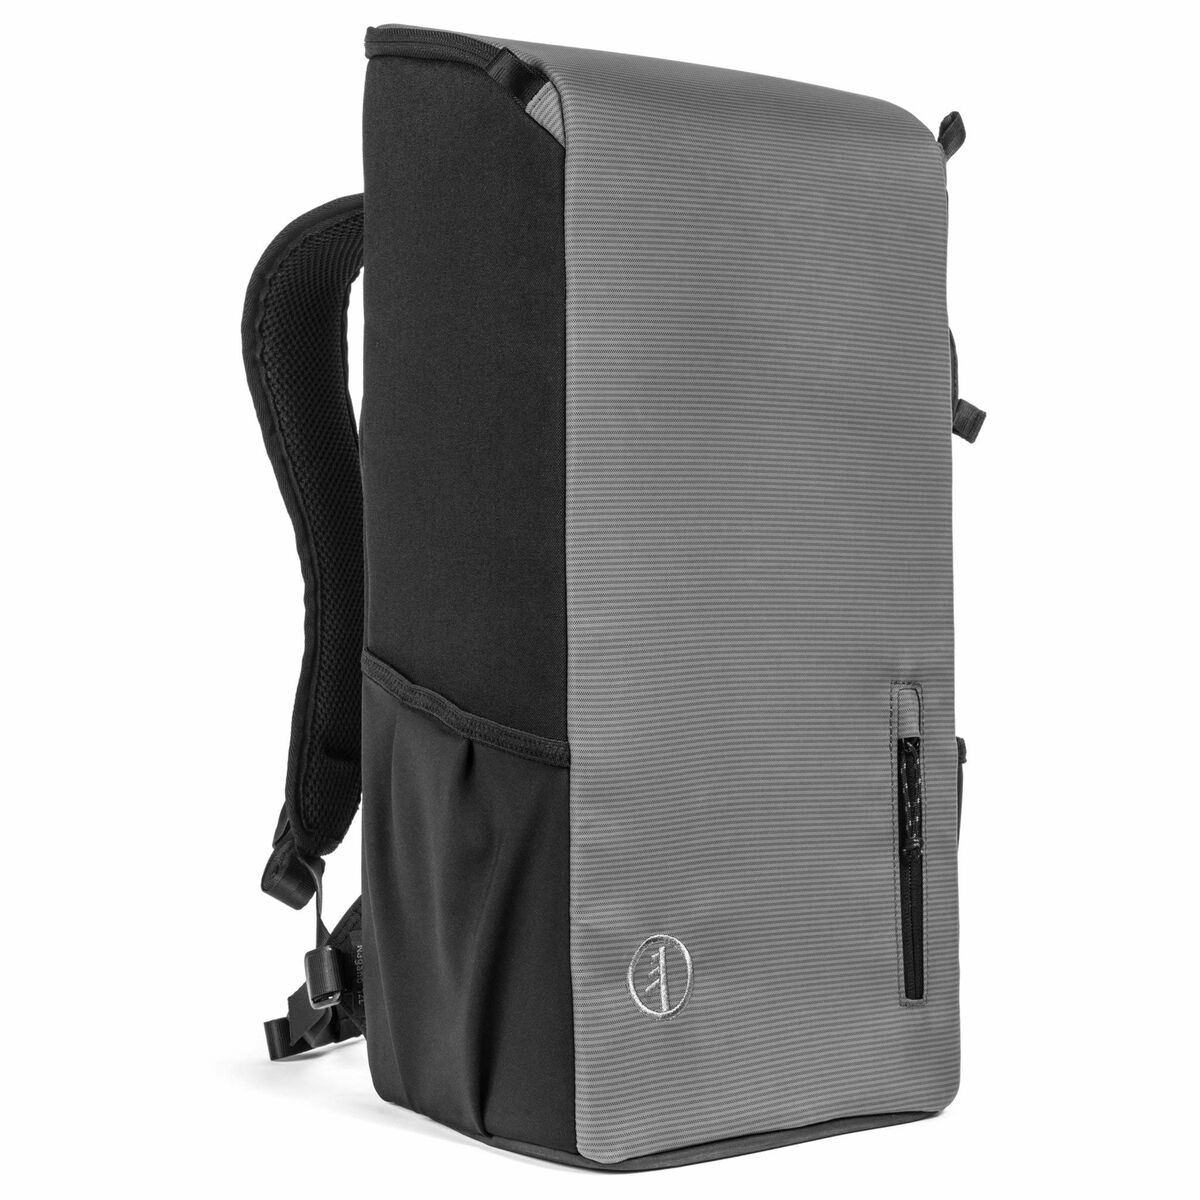 Rucksack with Upper Handle and Compartments Tamrac Nagano 21 x 14 x 41 cm